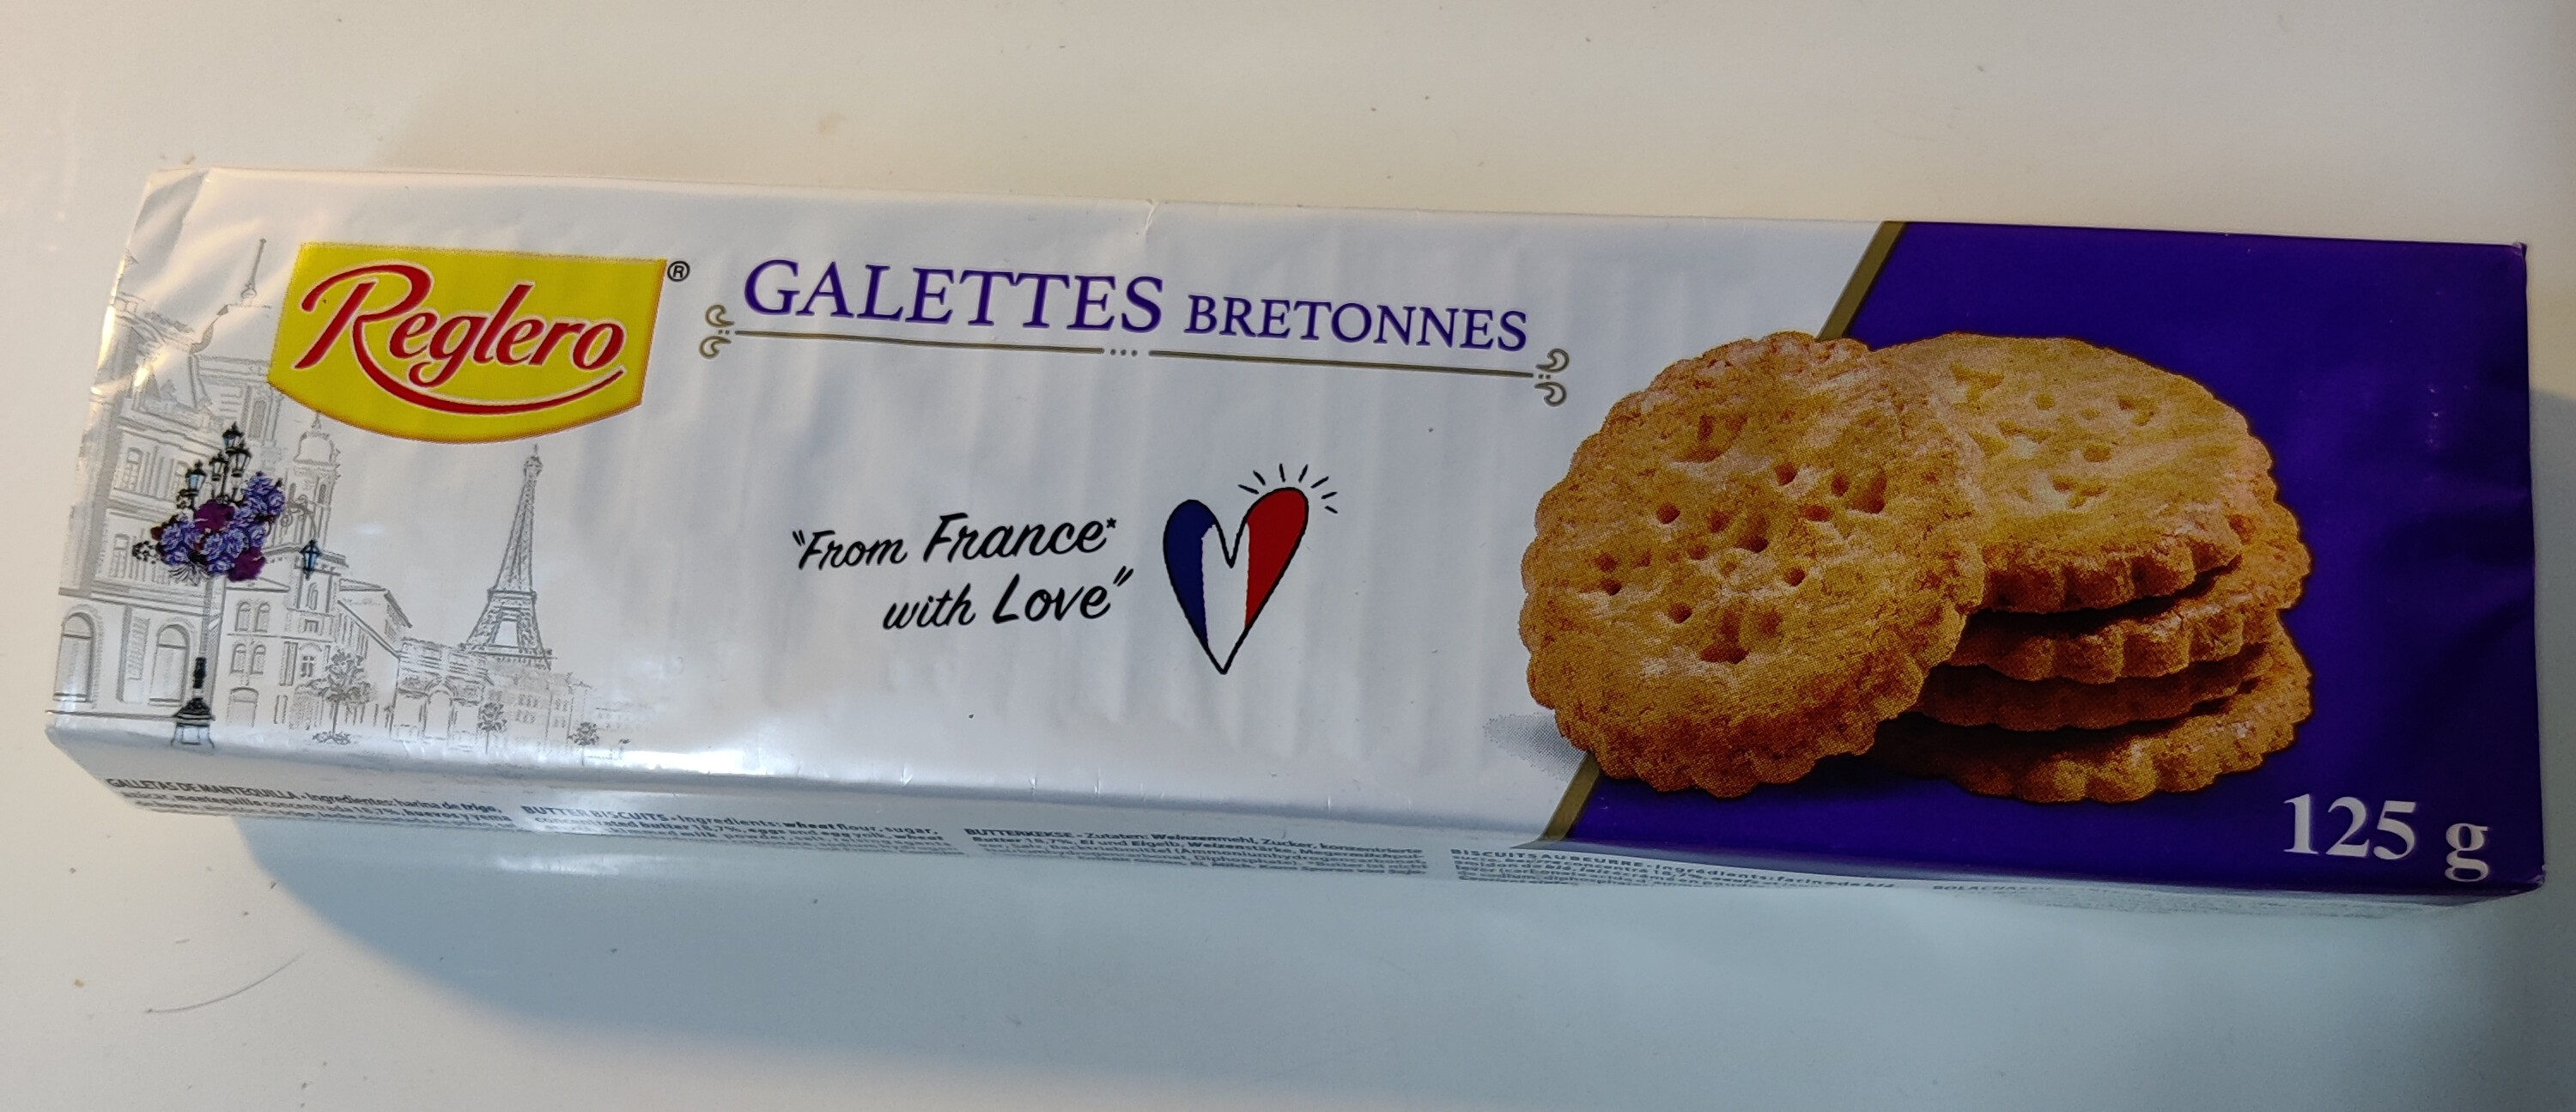 Butter Biscuits Bretons - Product